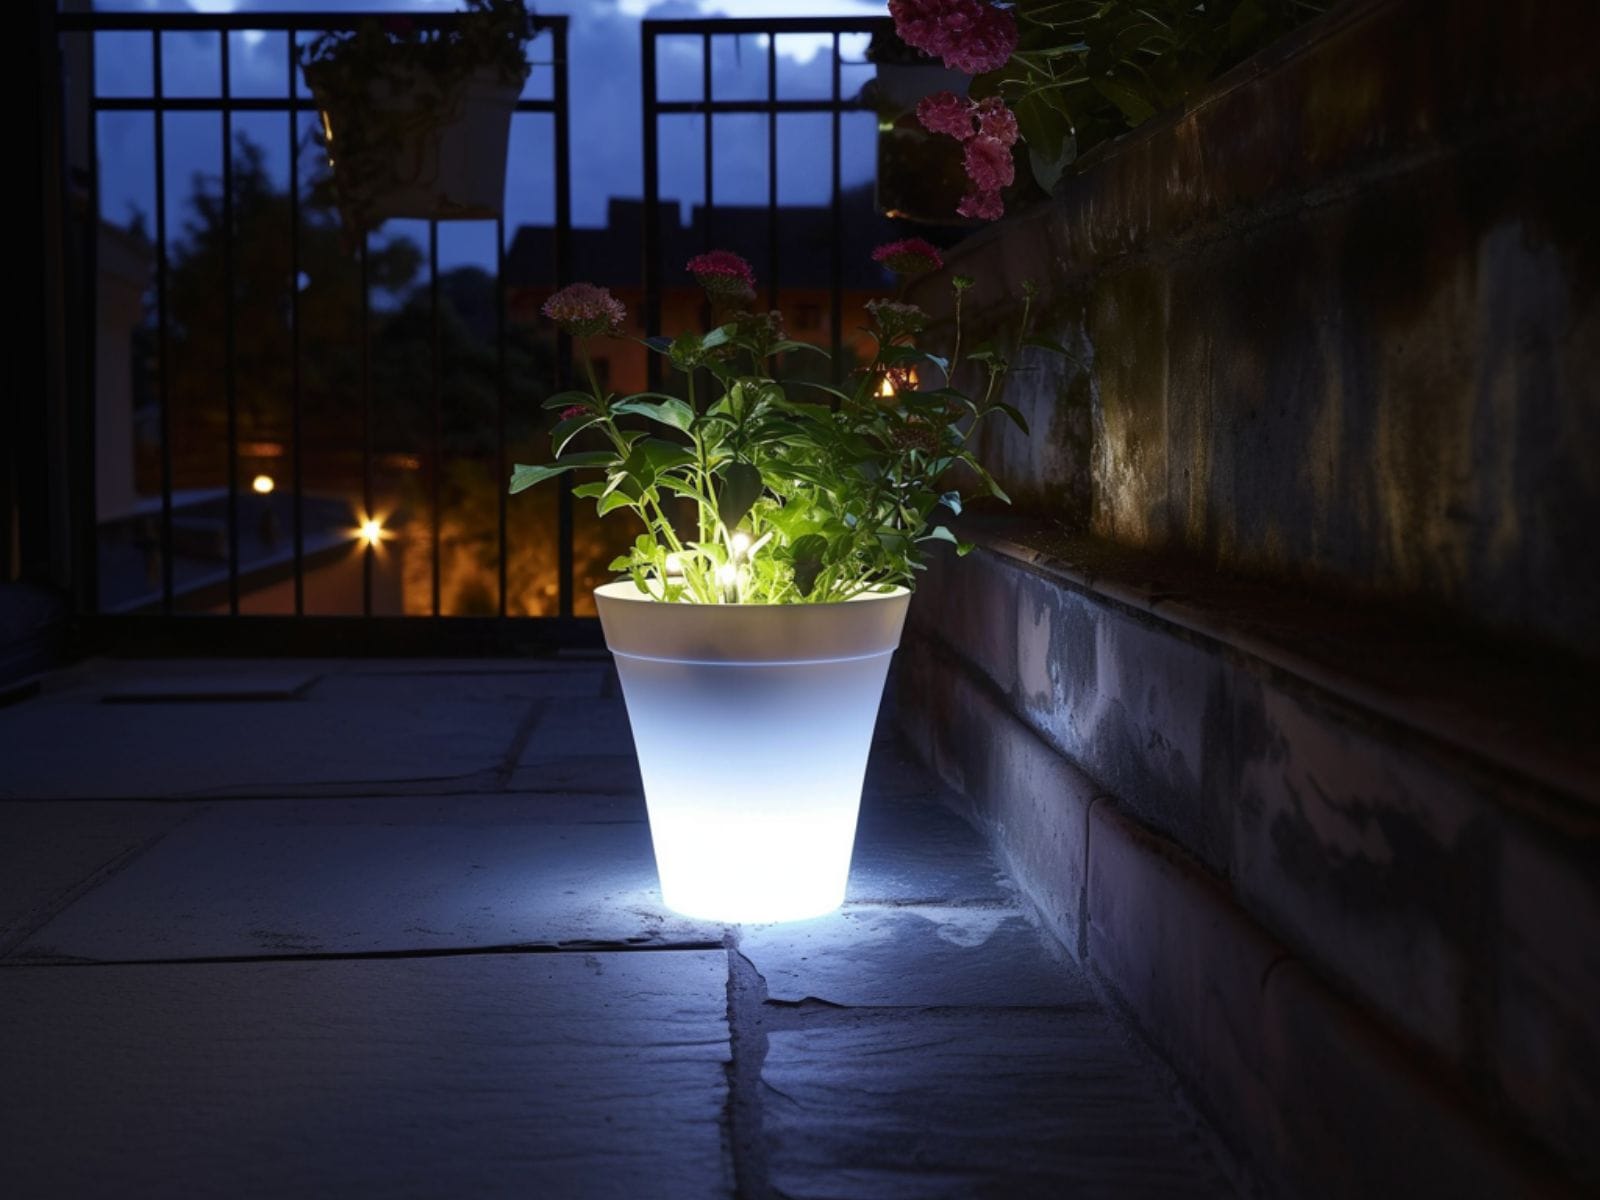 An LED planter placed on the patio floor